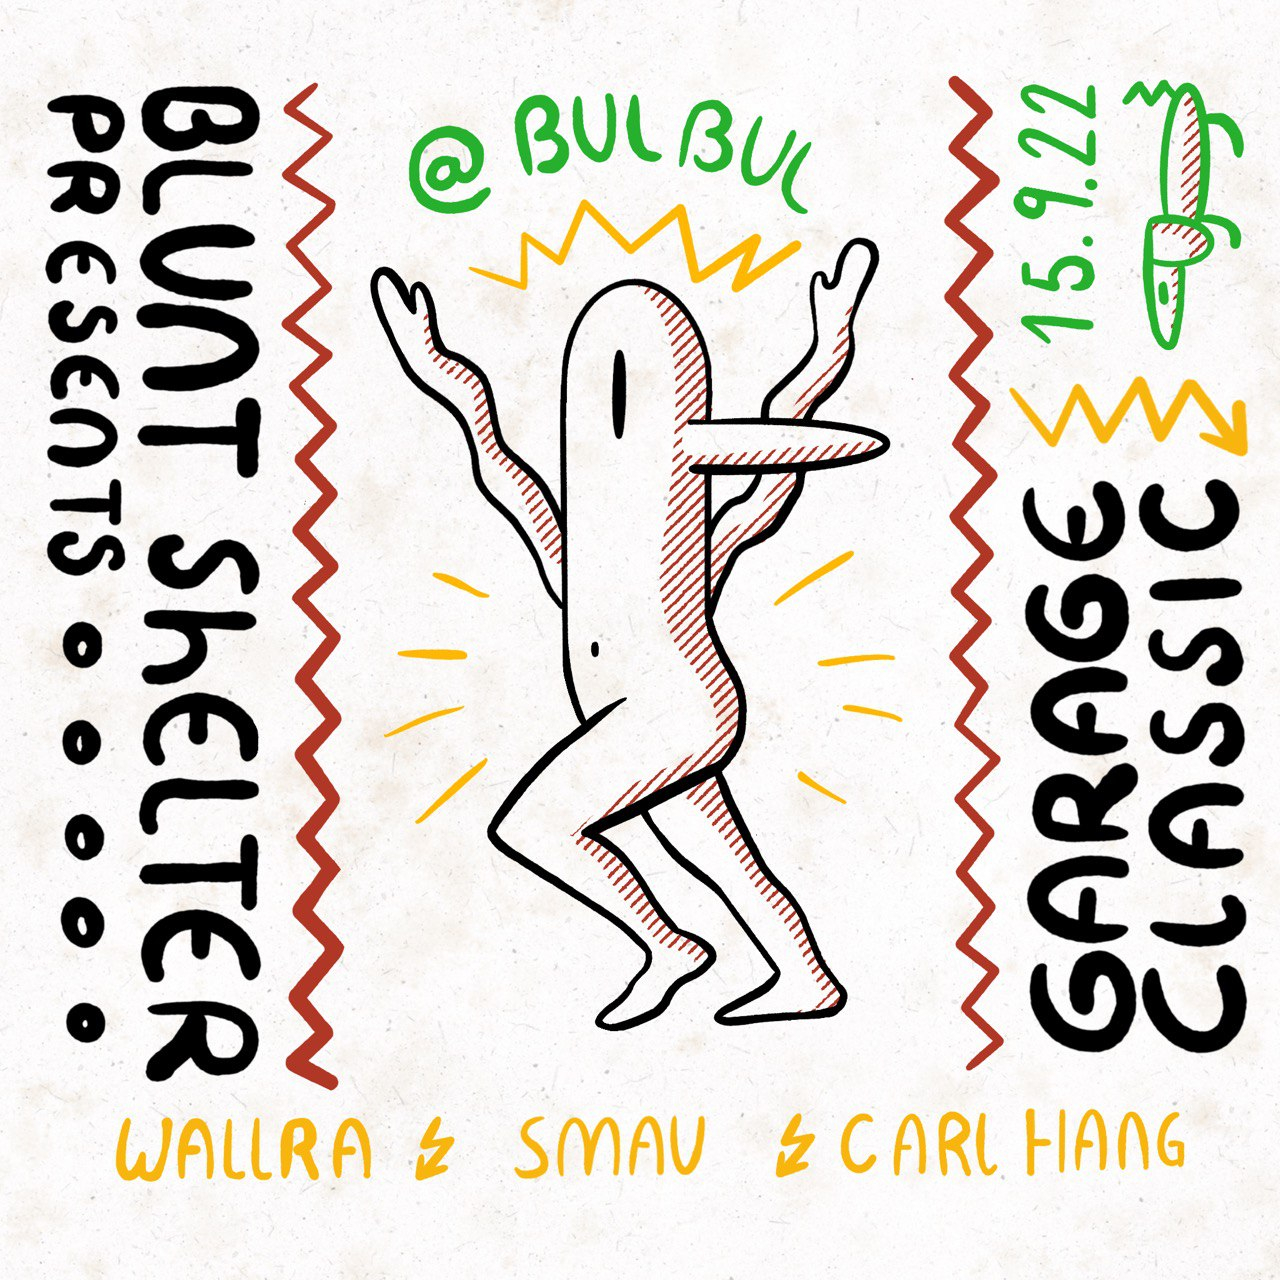 Blunt Shelter presents Garage Classic: Smau, Carl Hang, Wall Ra - Flyer front